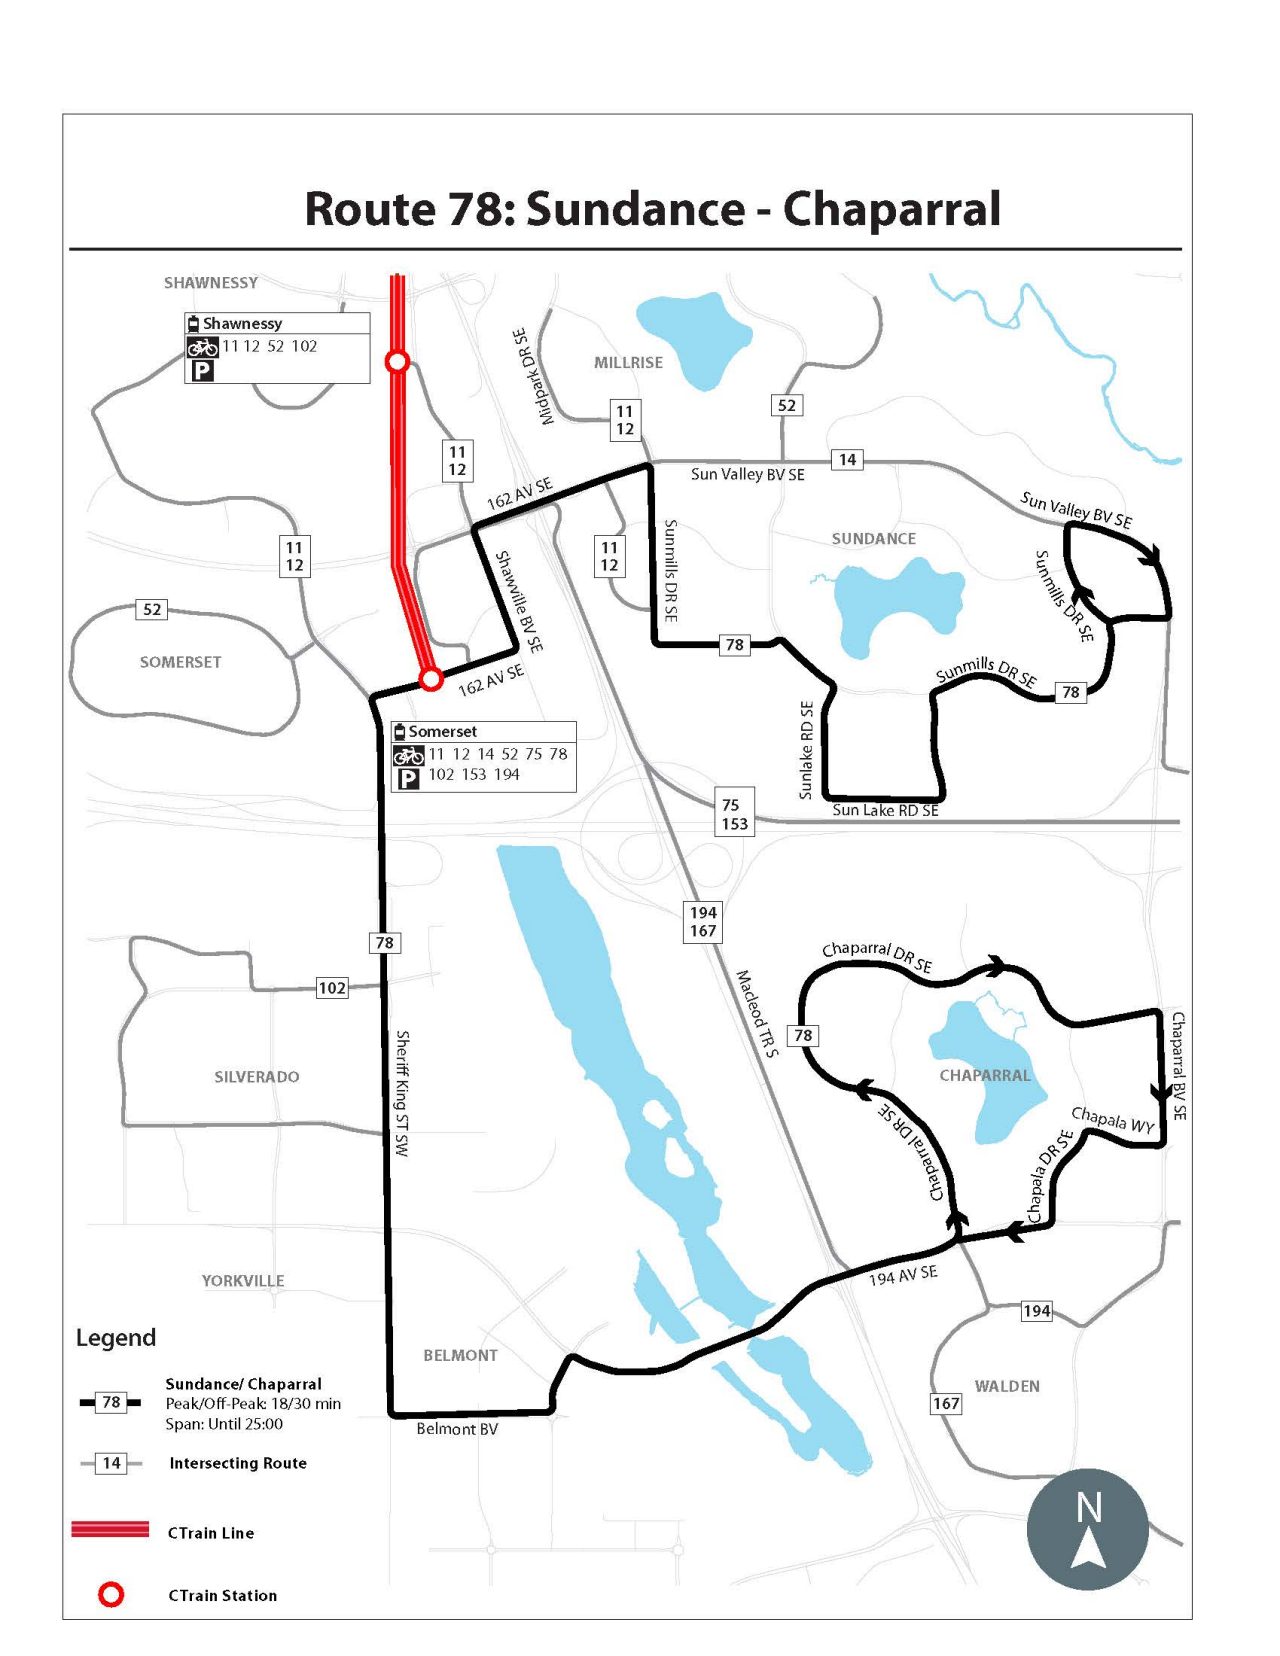 Route 78 route changes 2022